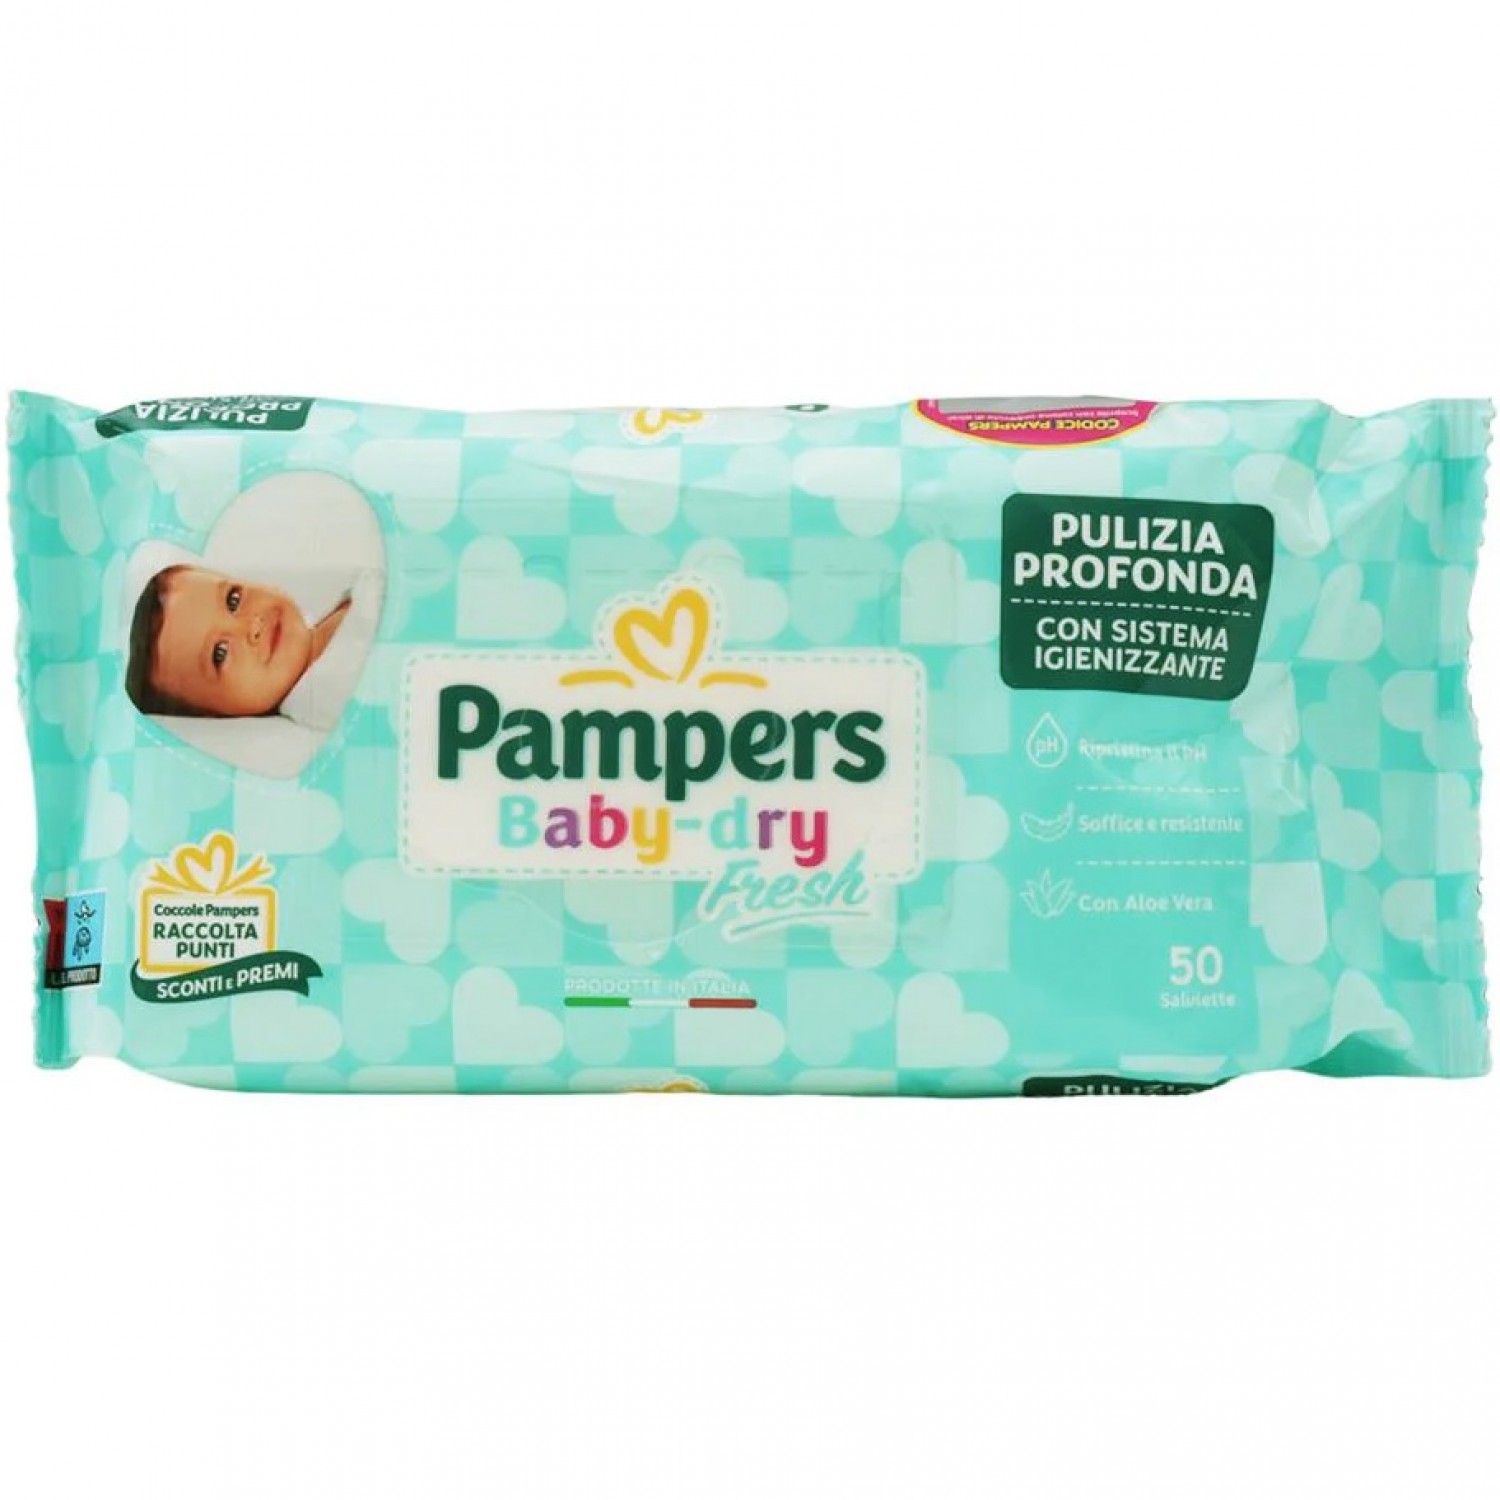 Image of Pampers Baby Dry Fresh Feuchttücher 50 Stk